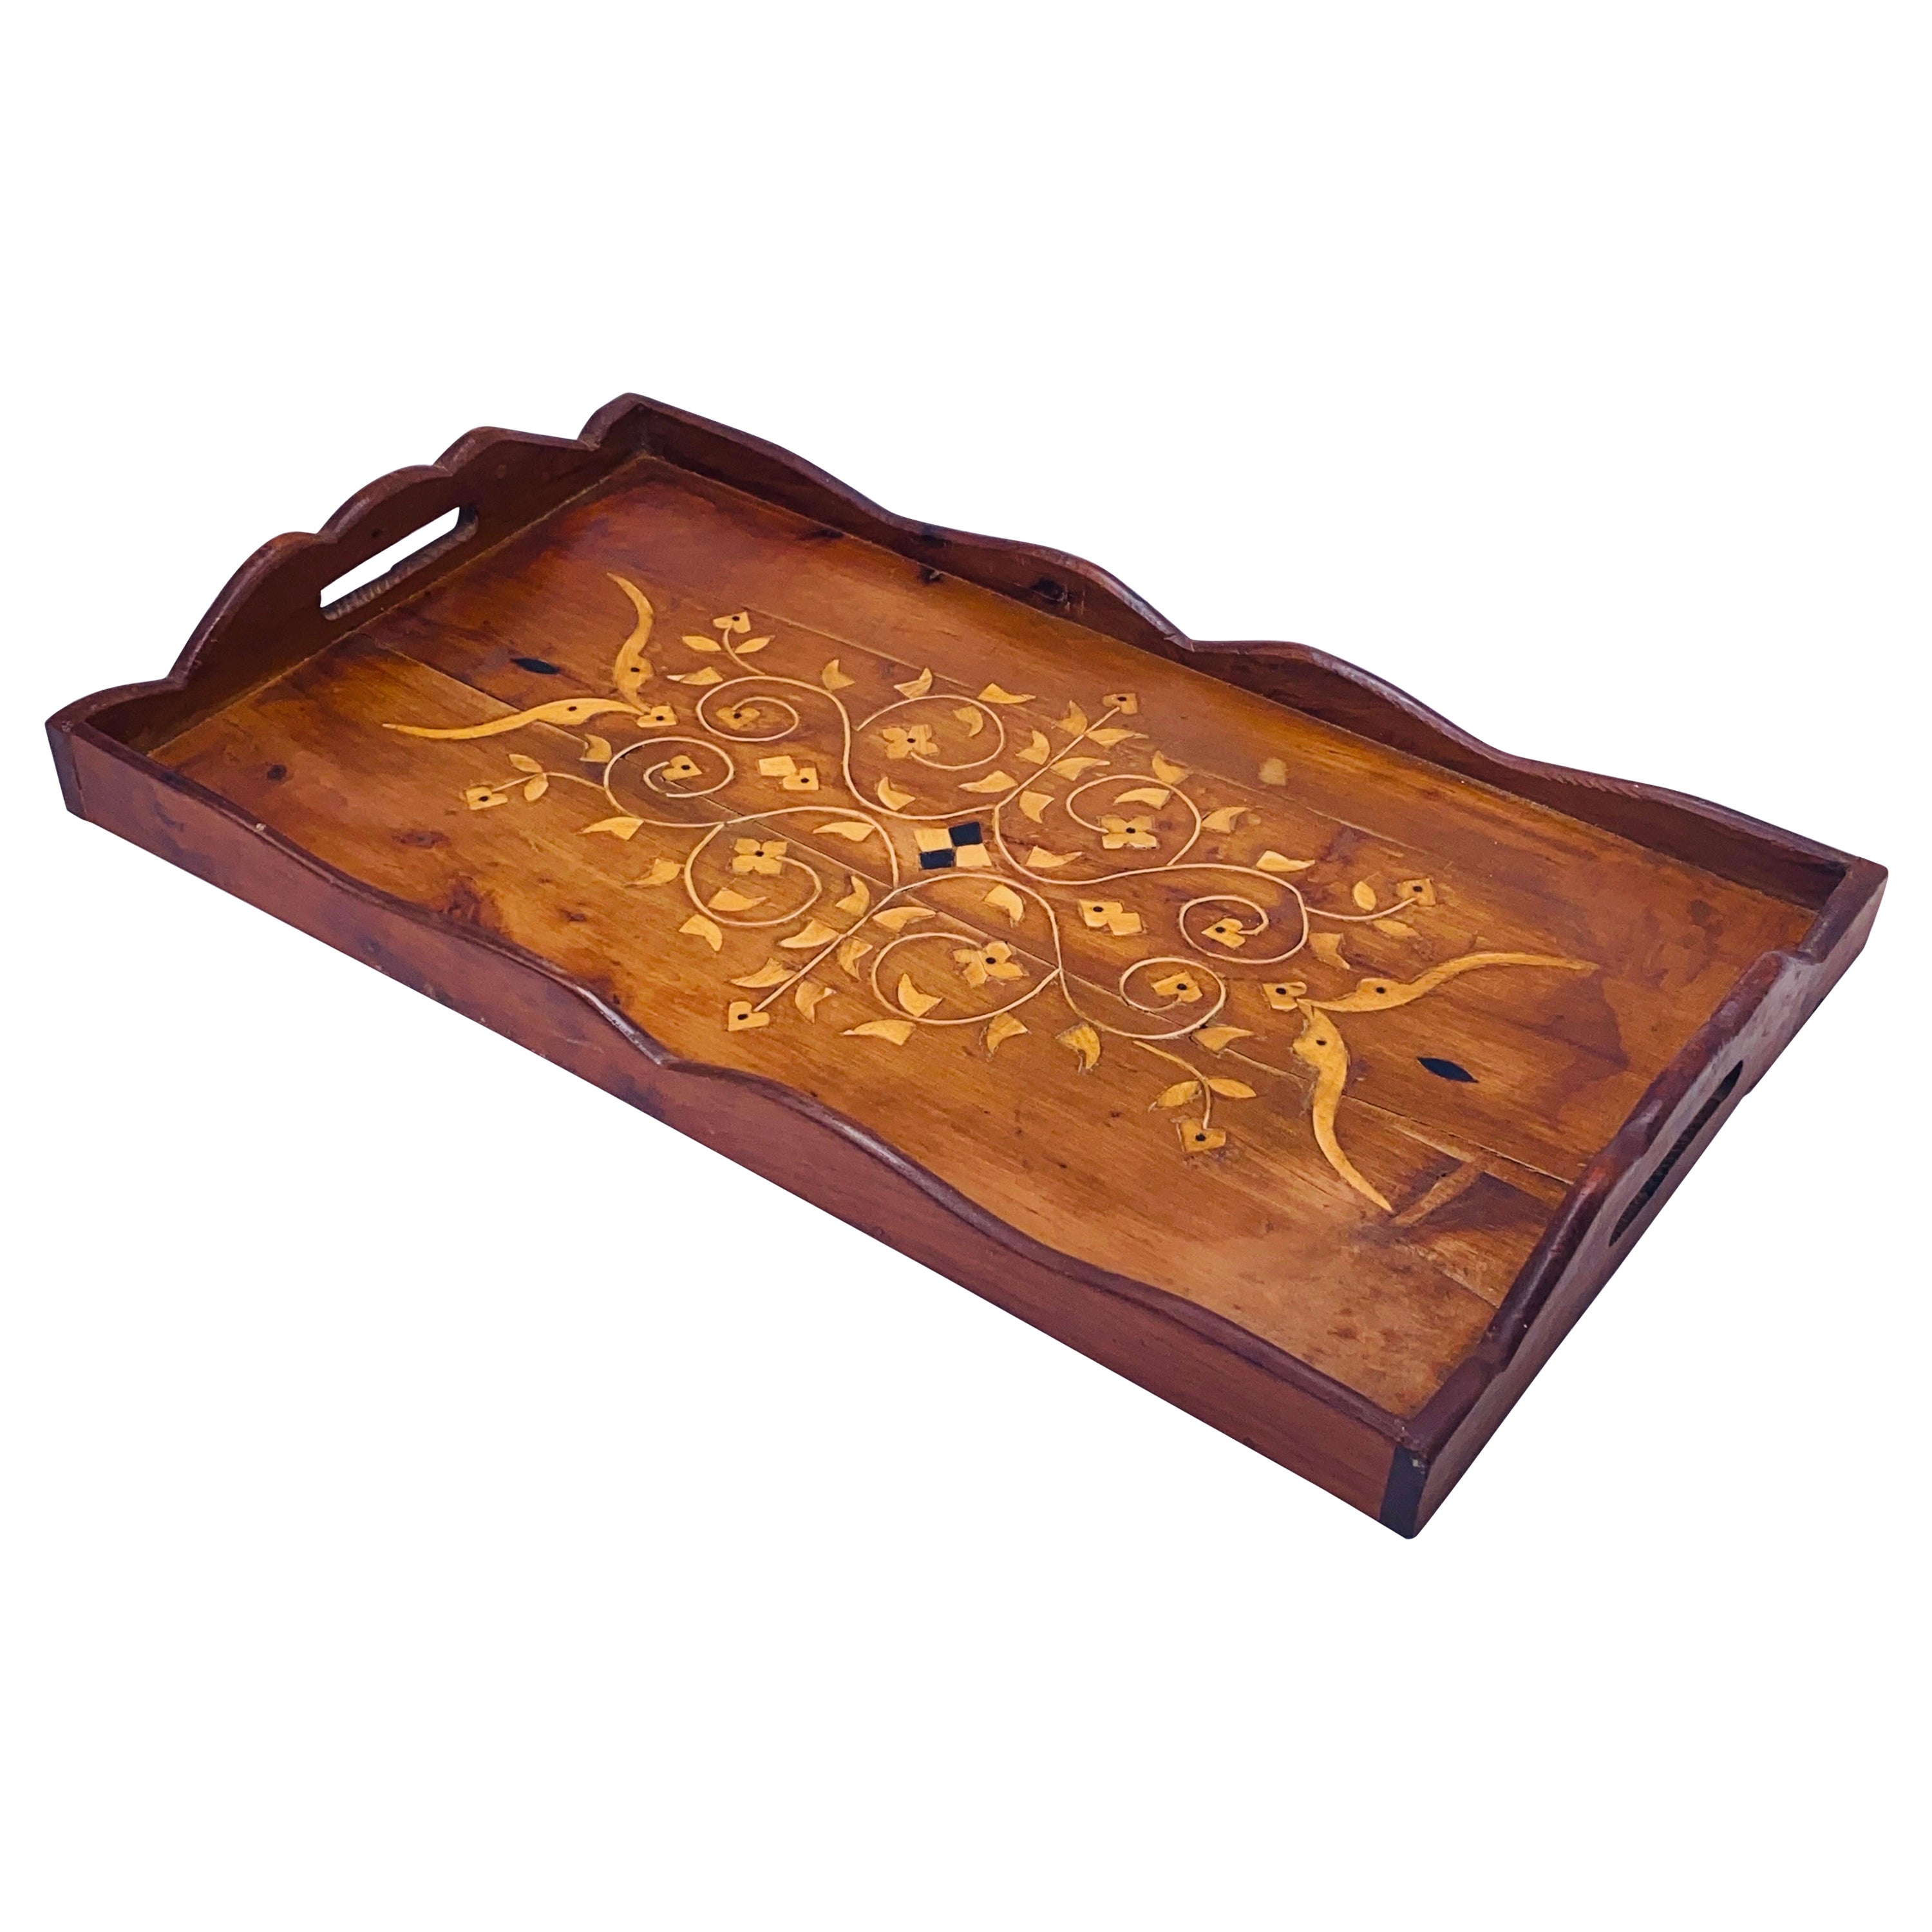 Platter in Wood Marquetry, Brown, Made in France at the Beginning of the 20th  For Sale